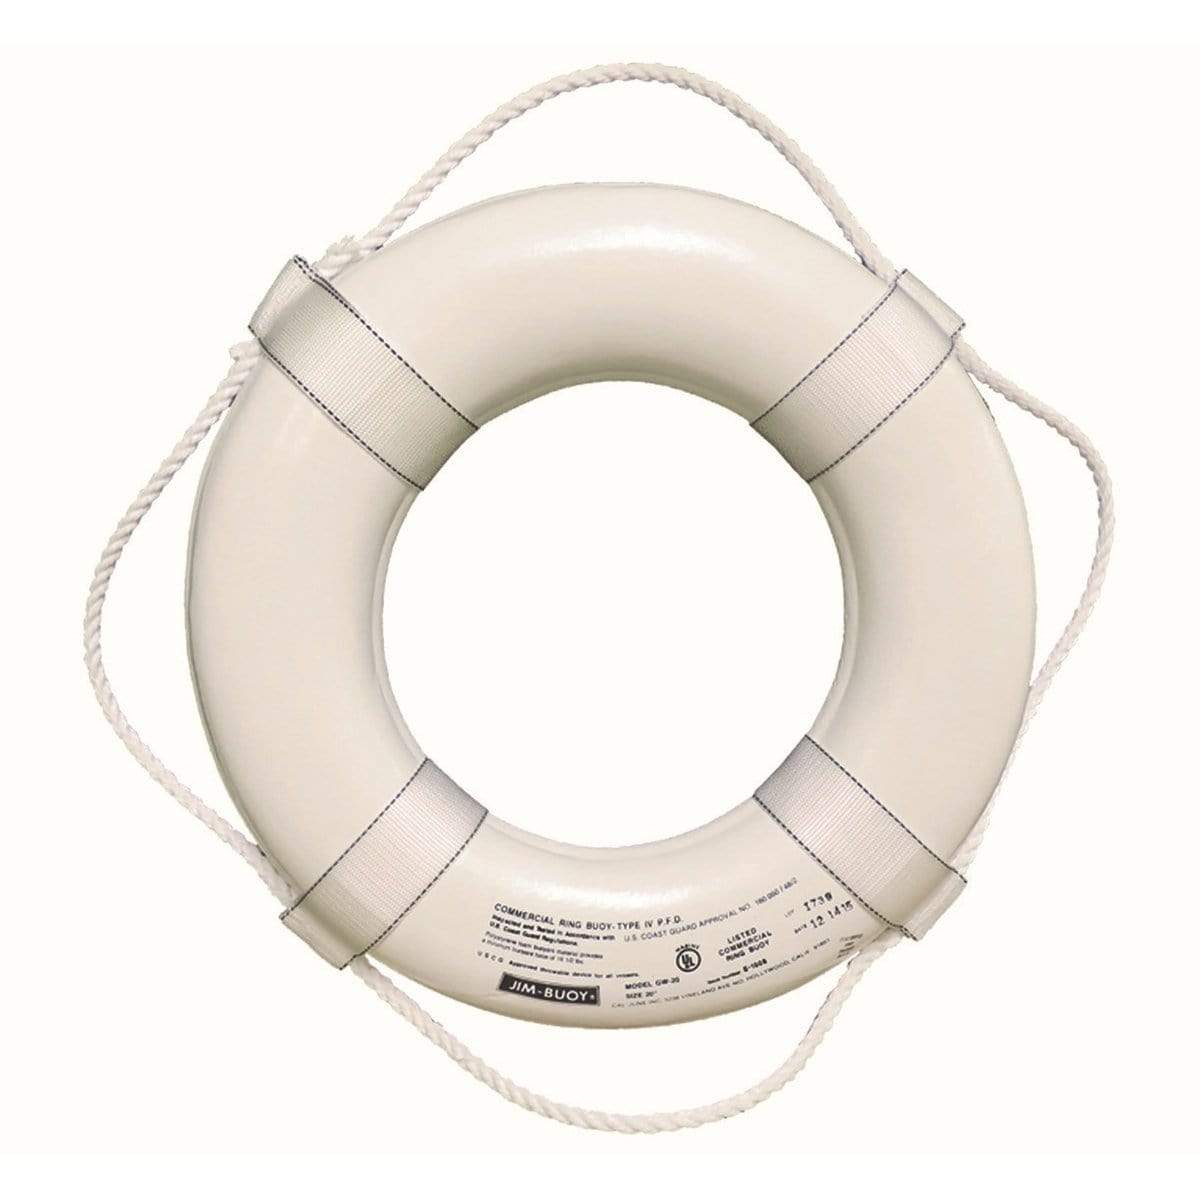 Cal-june Qualifies for Free Shipping Cal-June Ring Buoy 20" White #GW-20